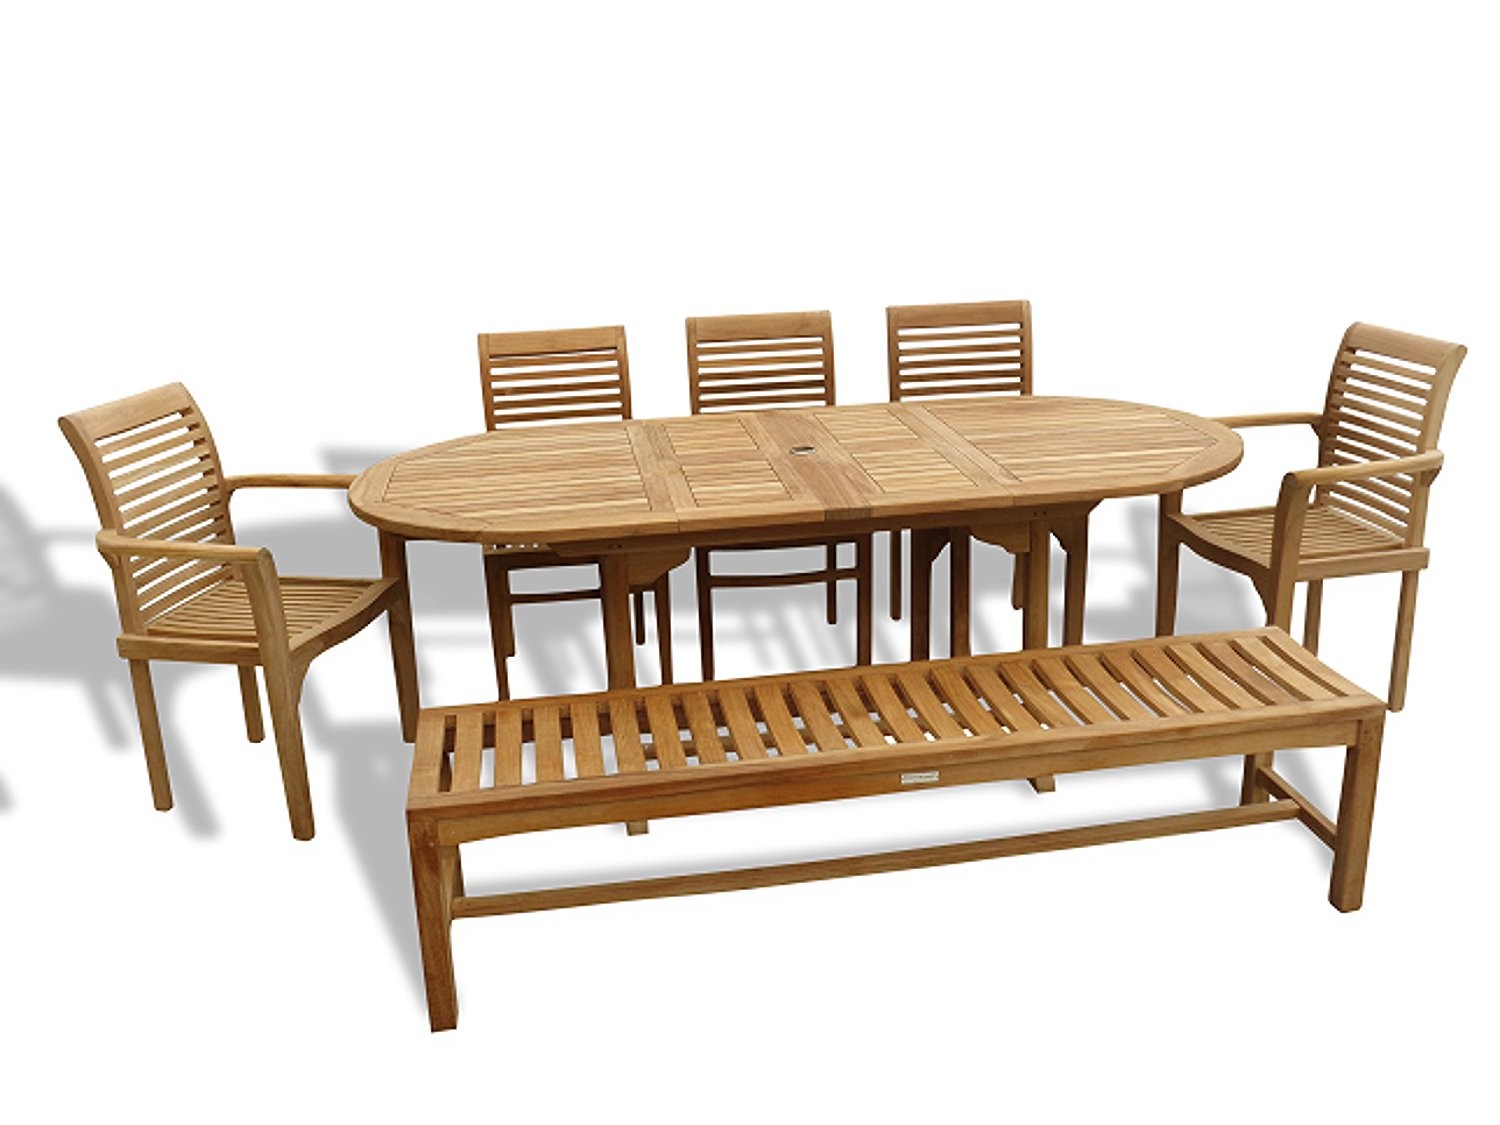 Buckingham 82" x 39" Double Leaf Oval Extension Table w One 72" Backless Bench & 5 Stacking Chairs...Seats 8-9